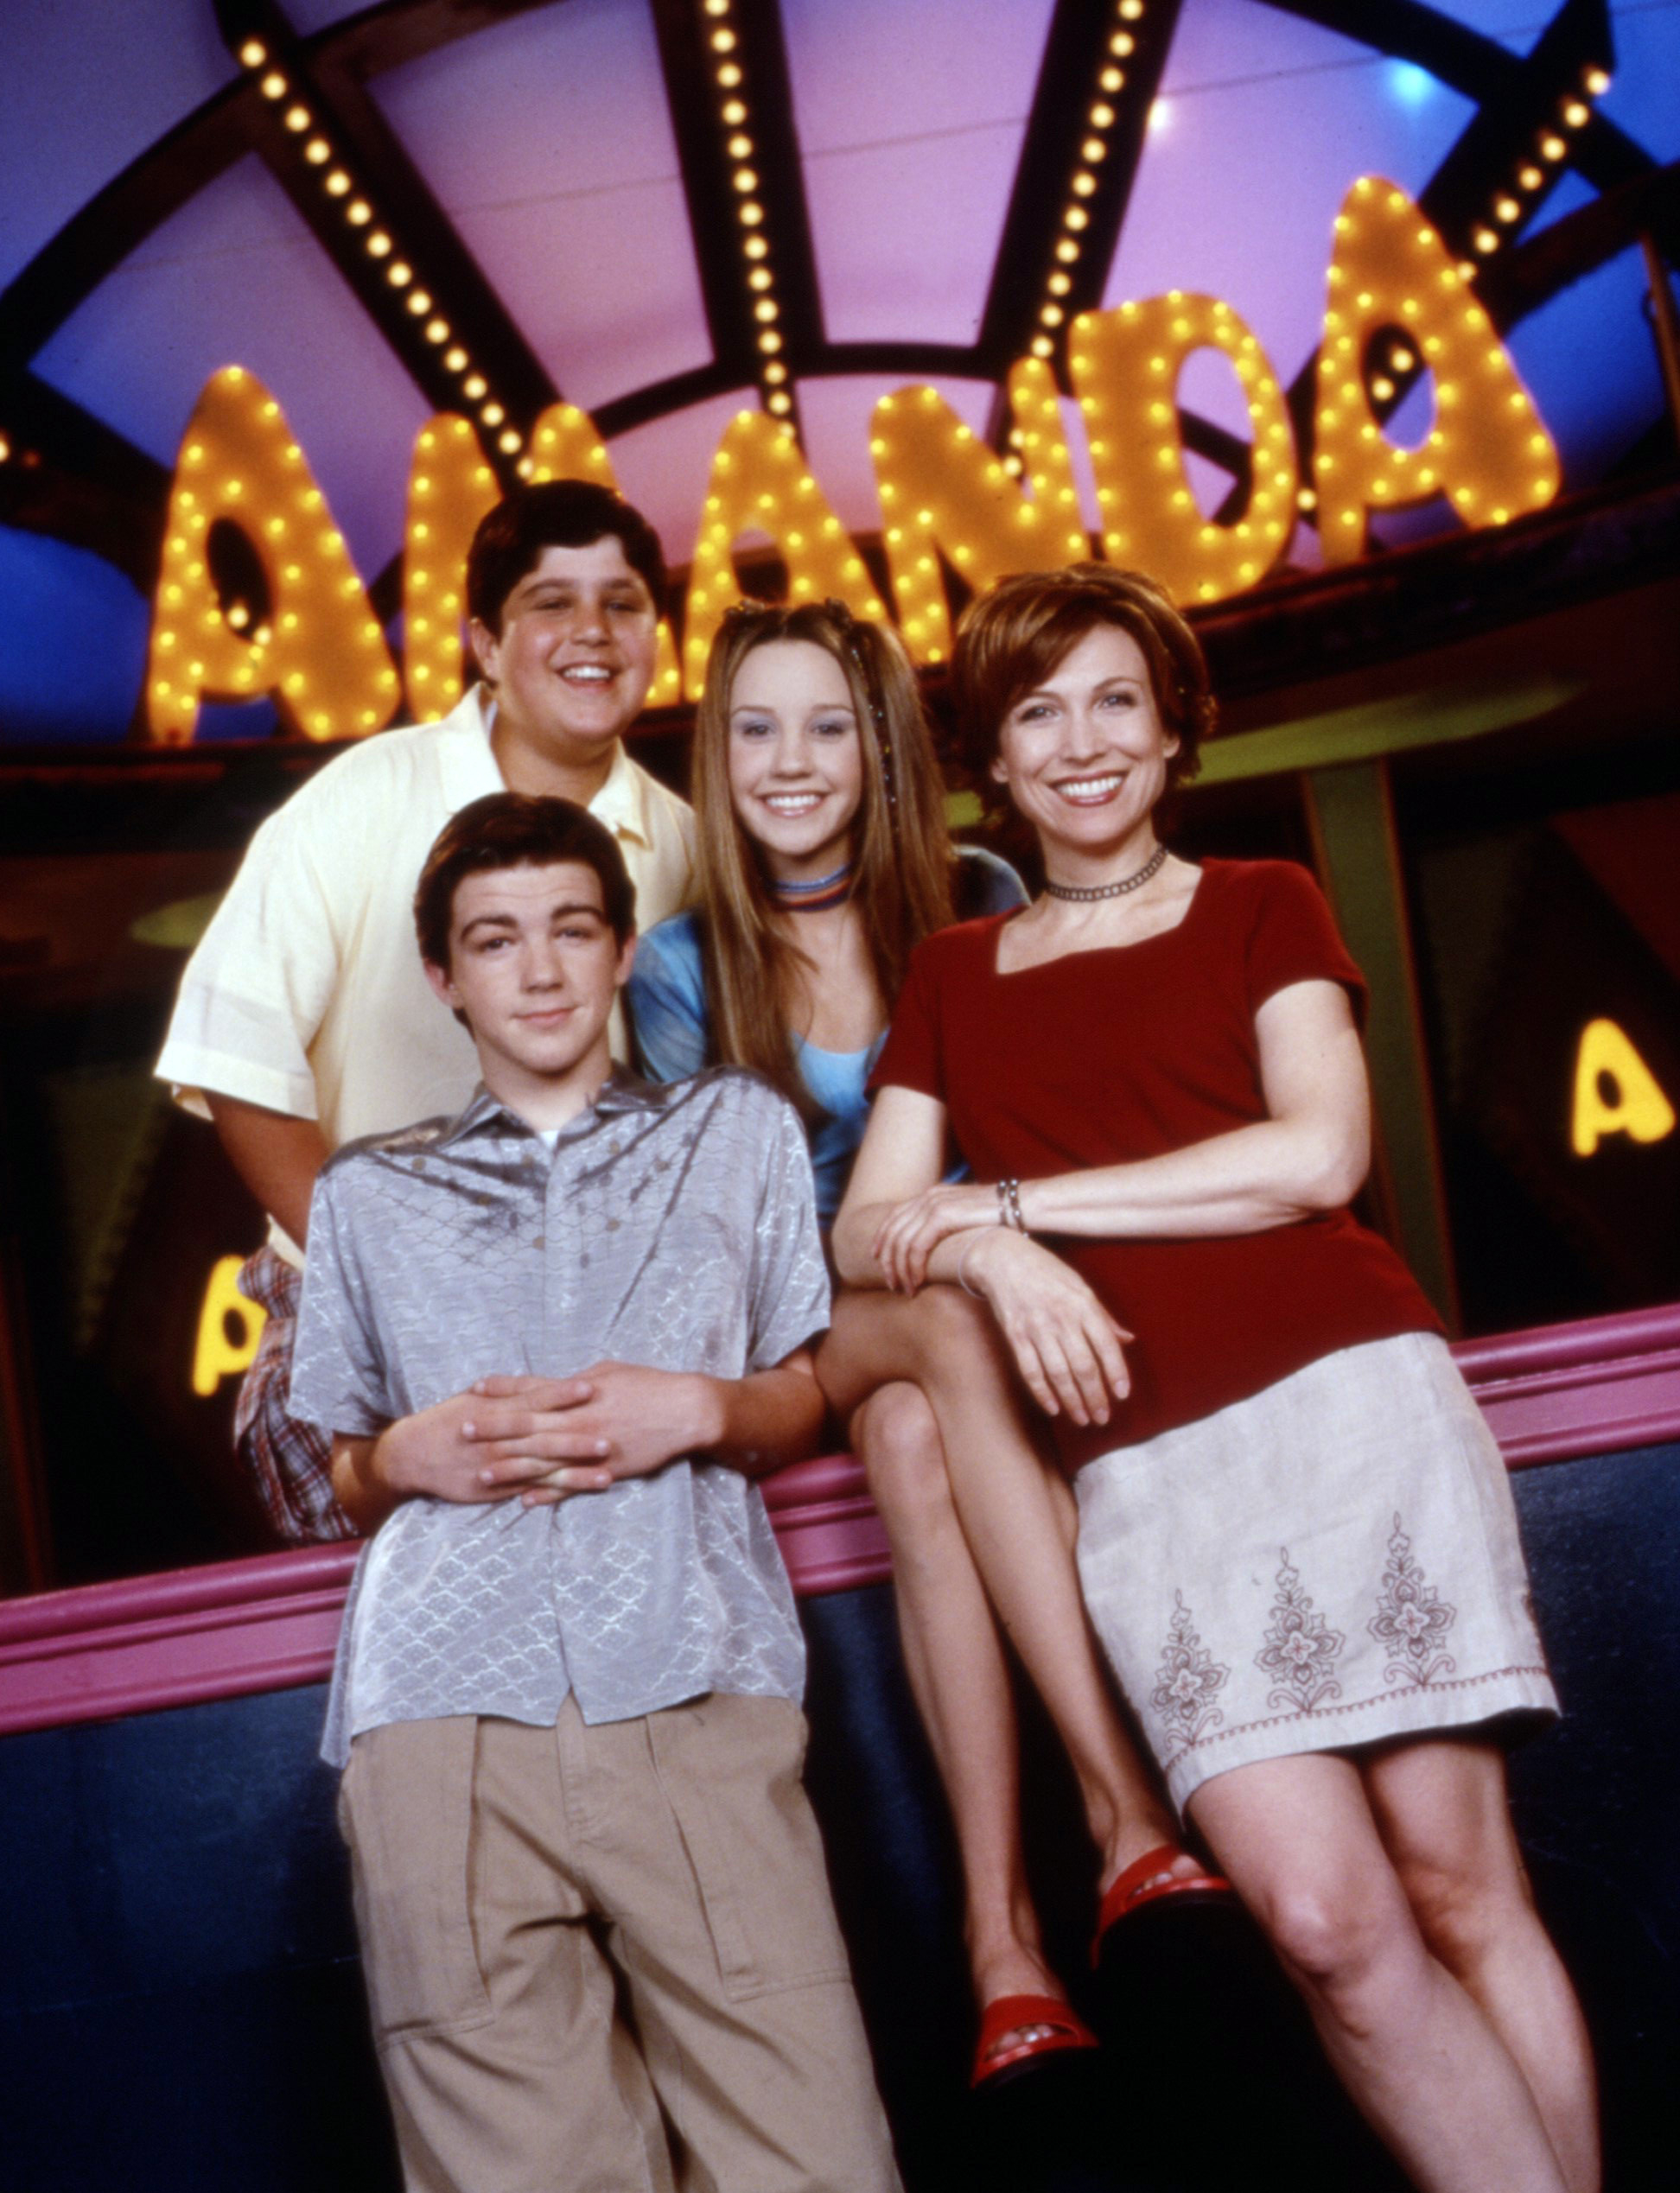 Promotional photo of &quot;The Amanda Show&quot; cast members, posing with neon sign above